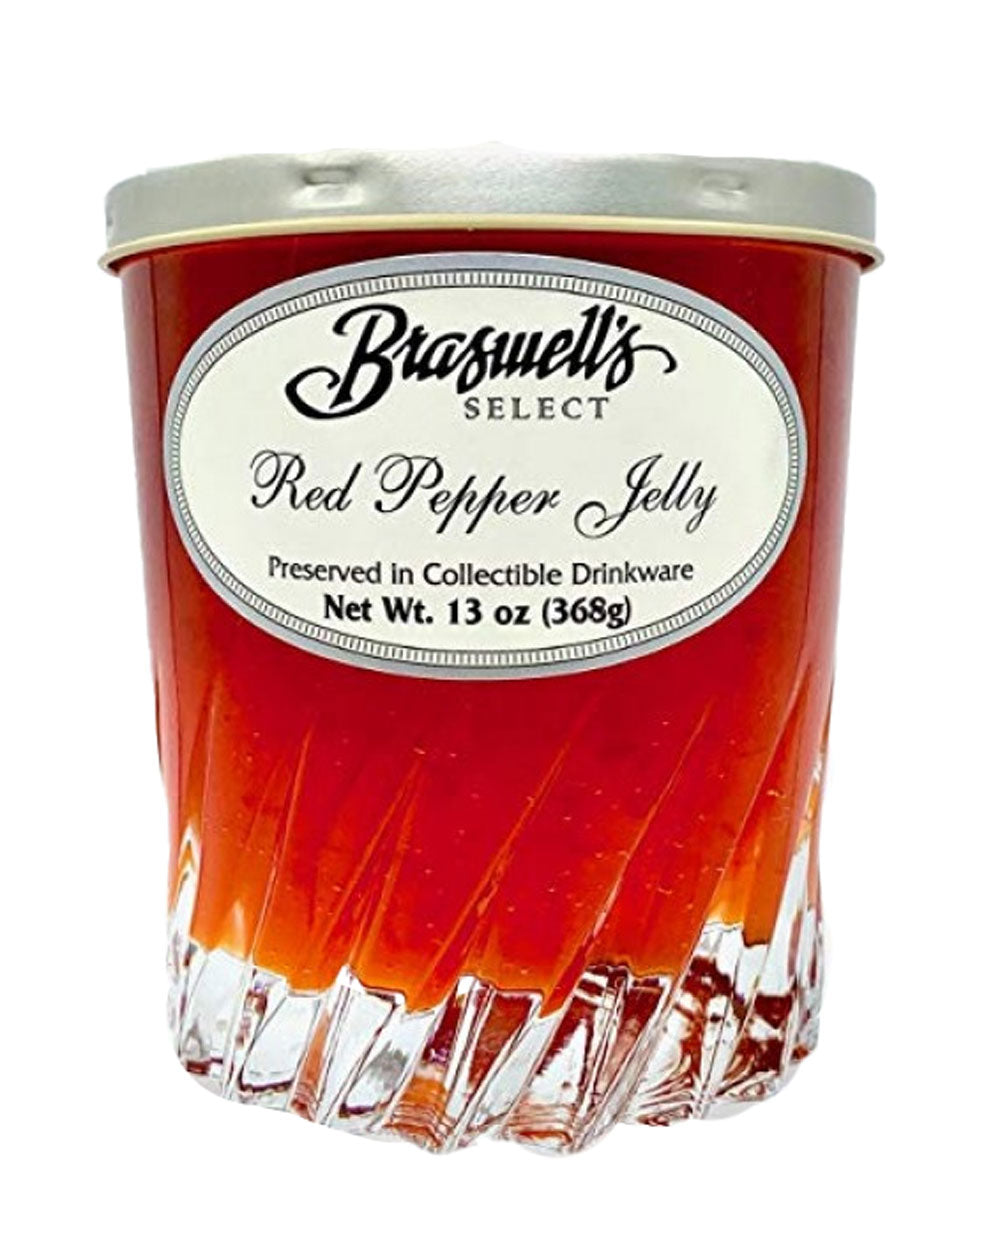 Red Pepper Jelly Old Fashioned Collectable Glassware